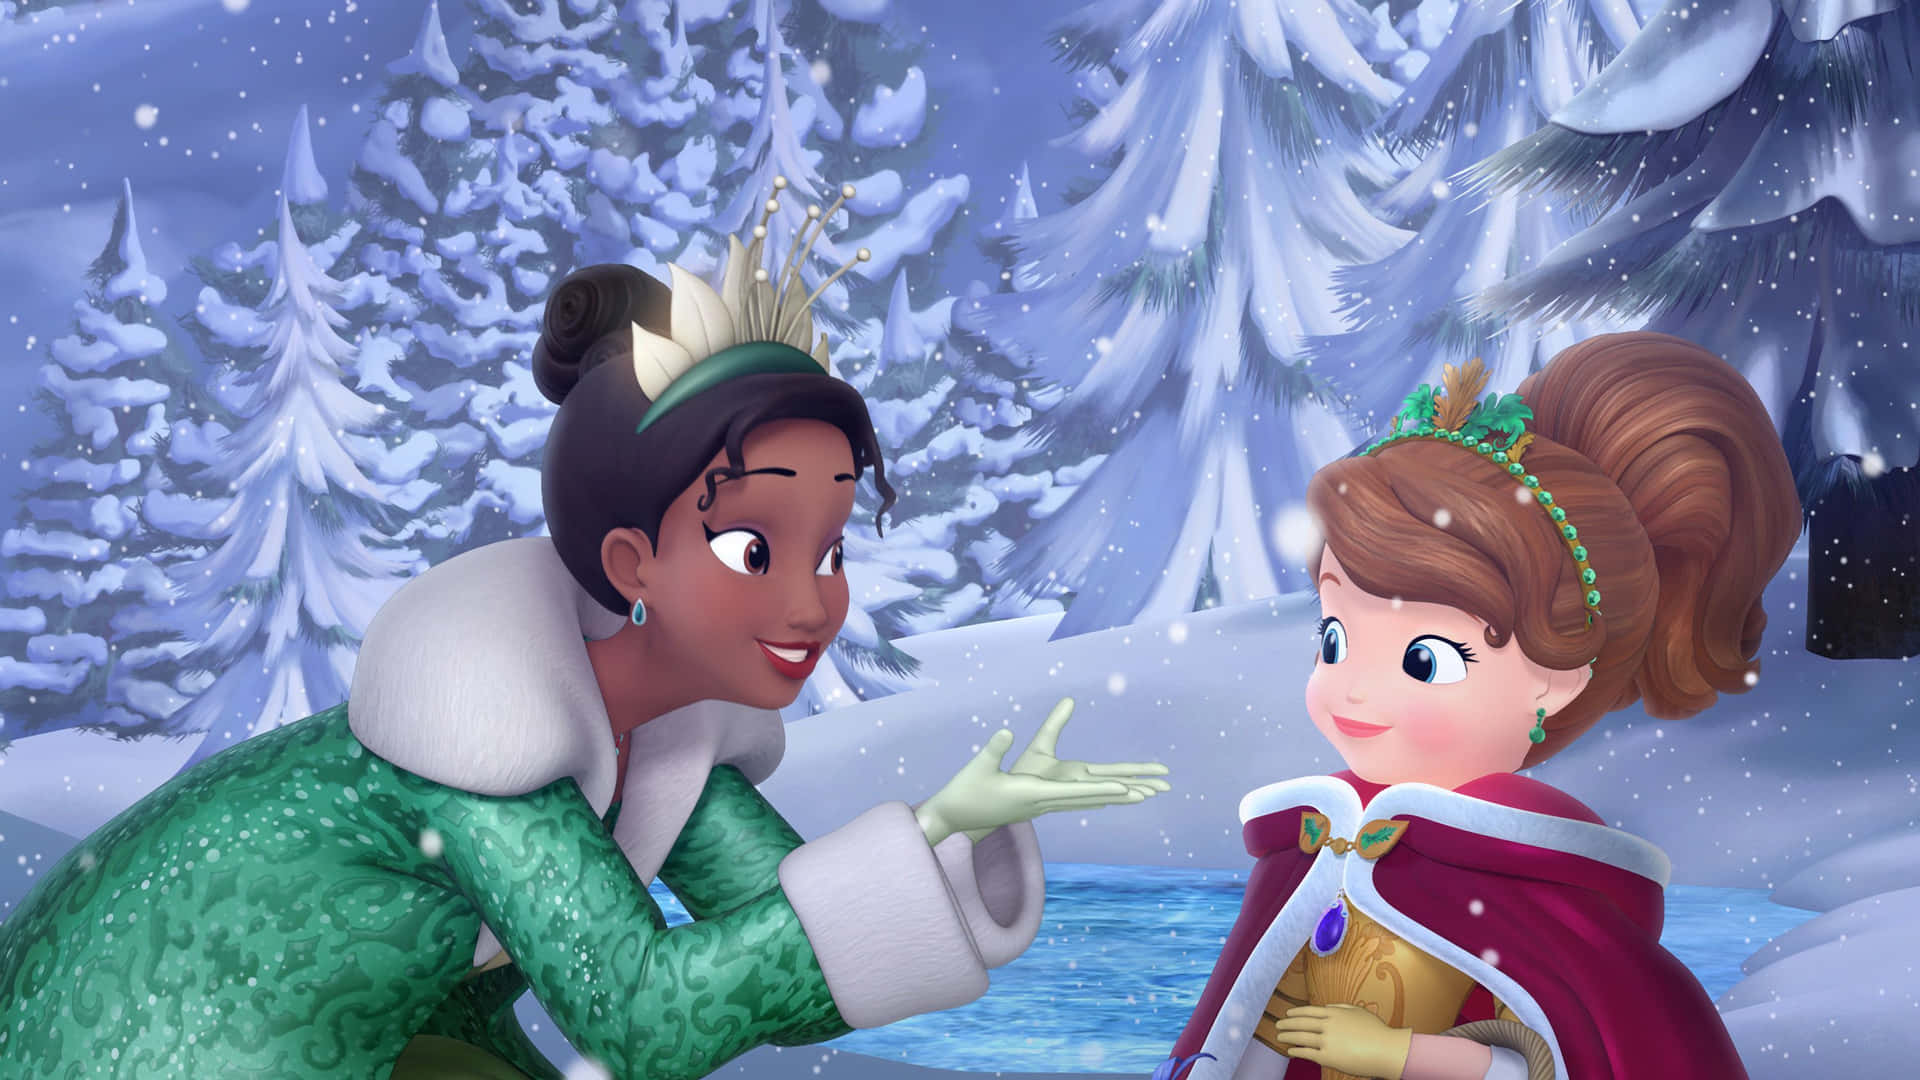 Disney's Princess Tiana Smiling with Excitement Wallpaper